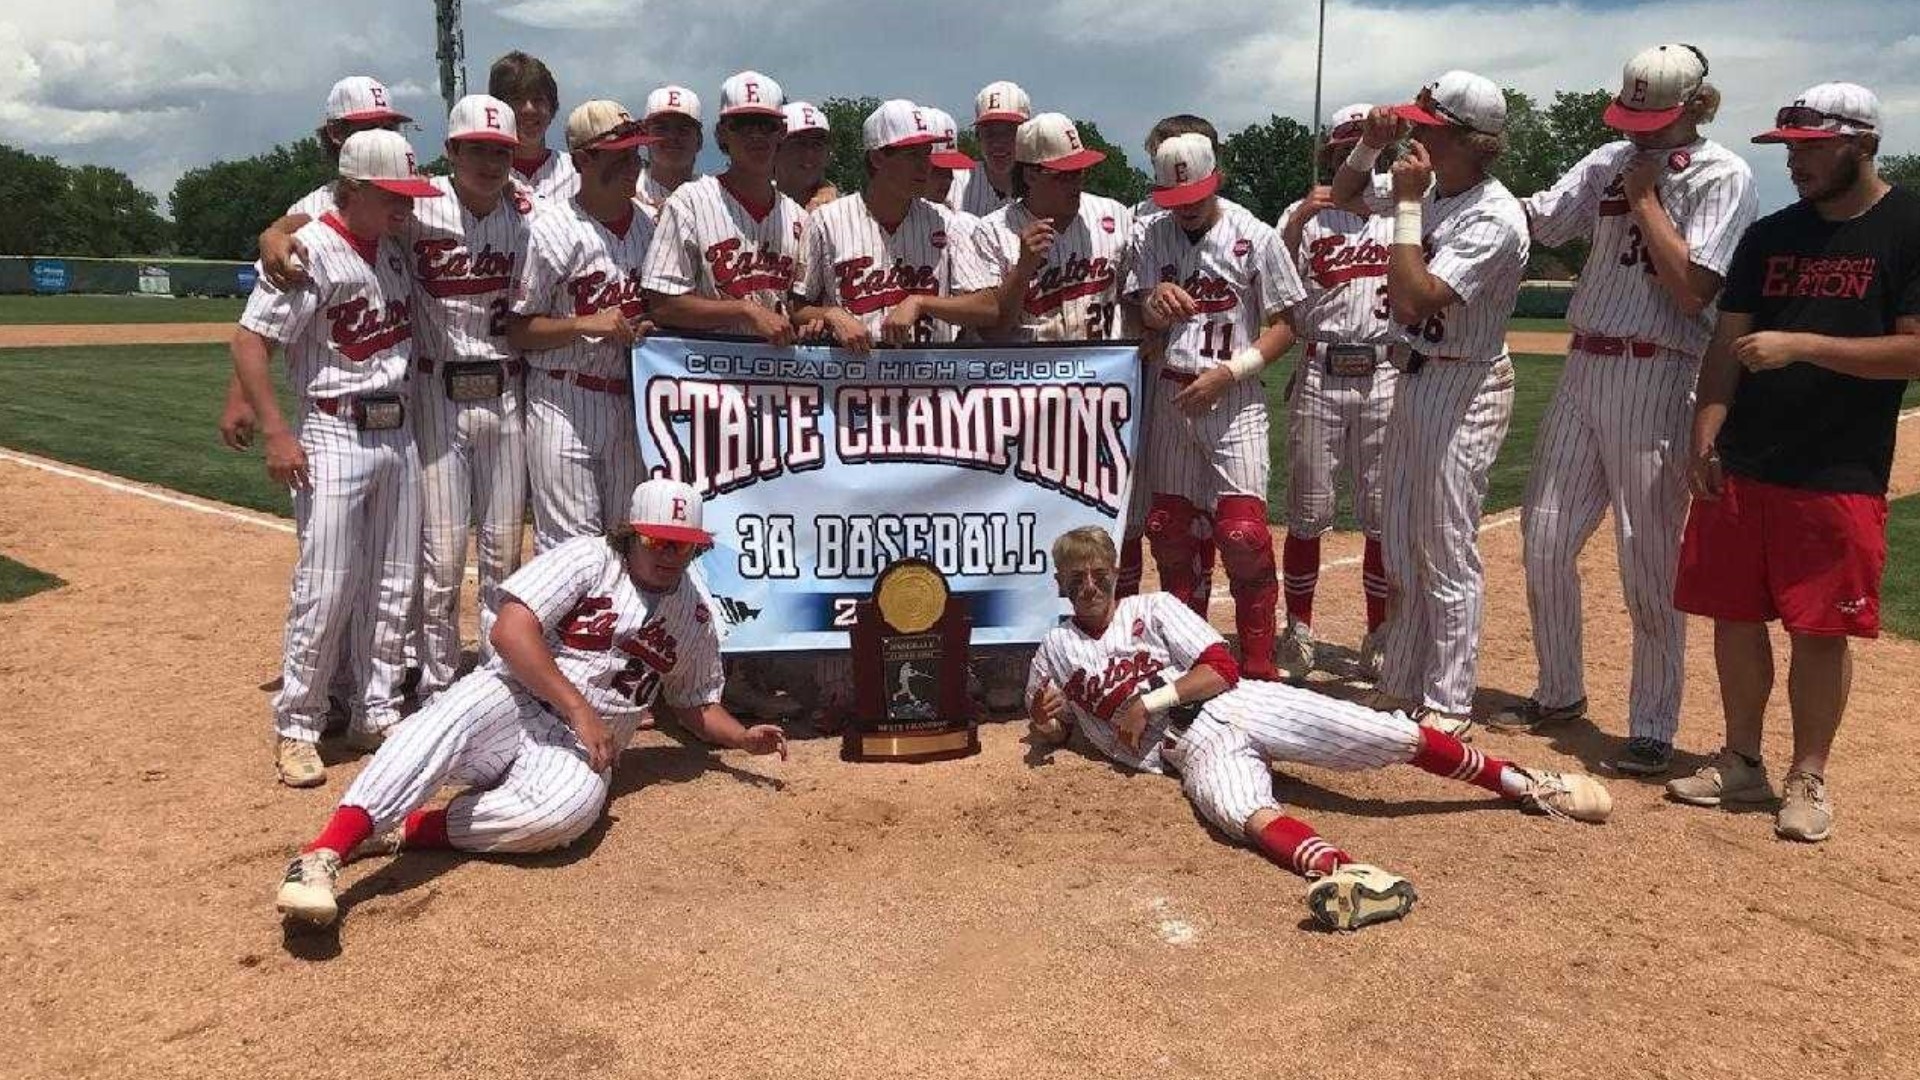 The Reds defeated University 10-4 in the Class 3A state title game on Saturday.